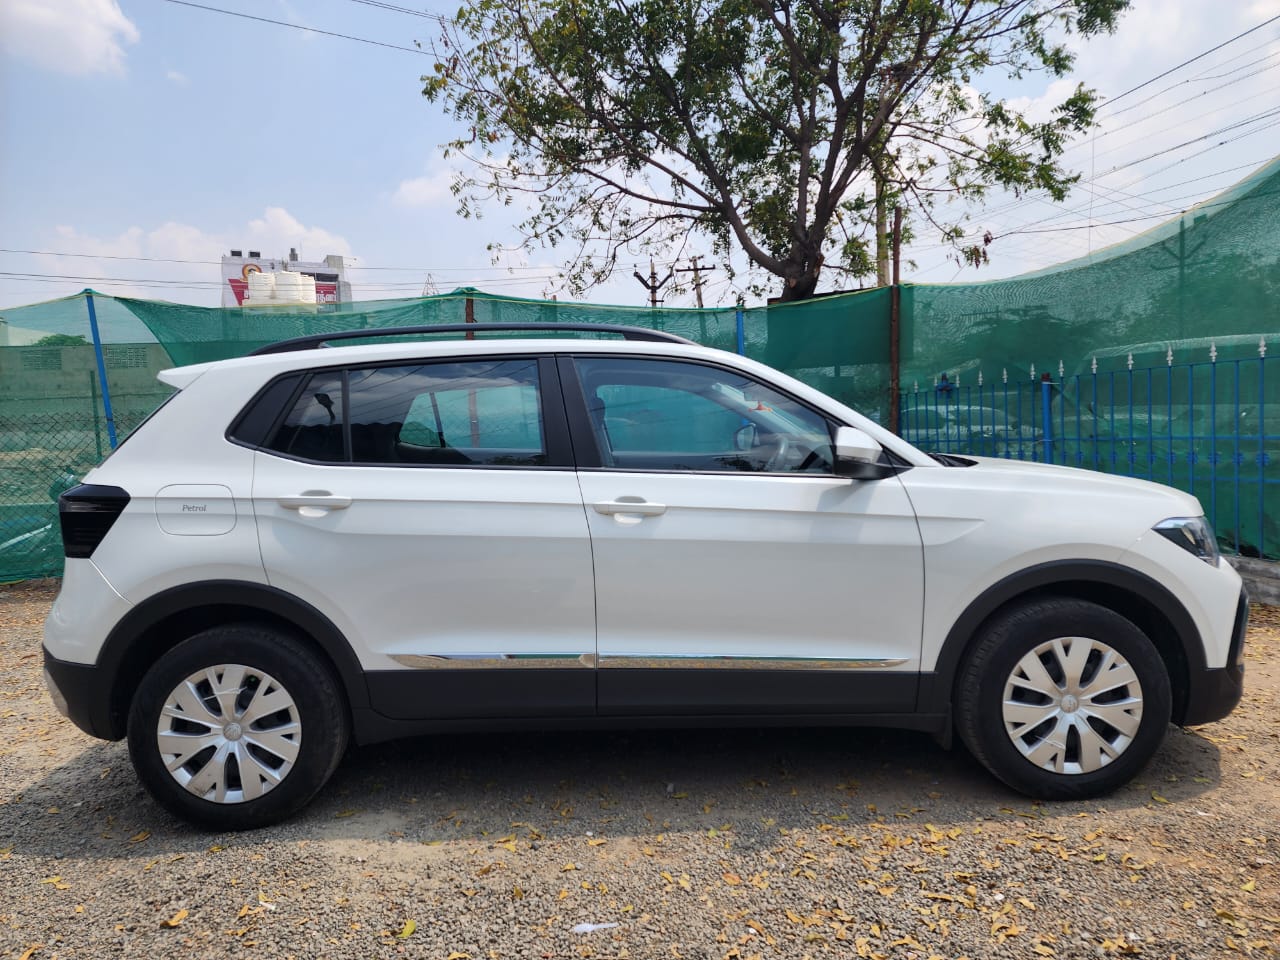 6480-for-sale-Volks-Wagen-Tiguan-Petrol-First-Owner-2021-TN-registered-rs--1